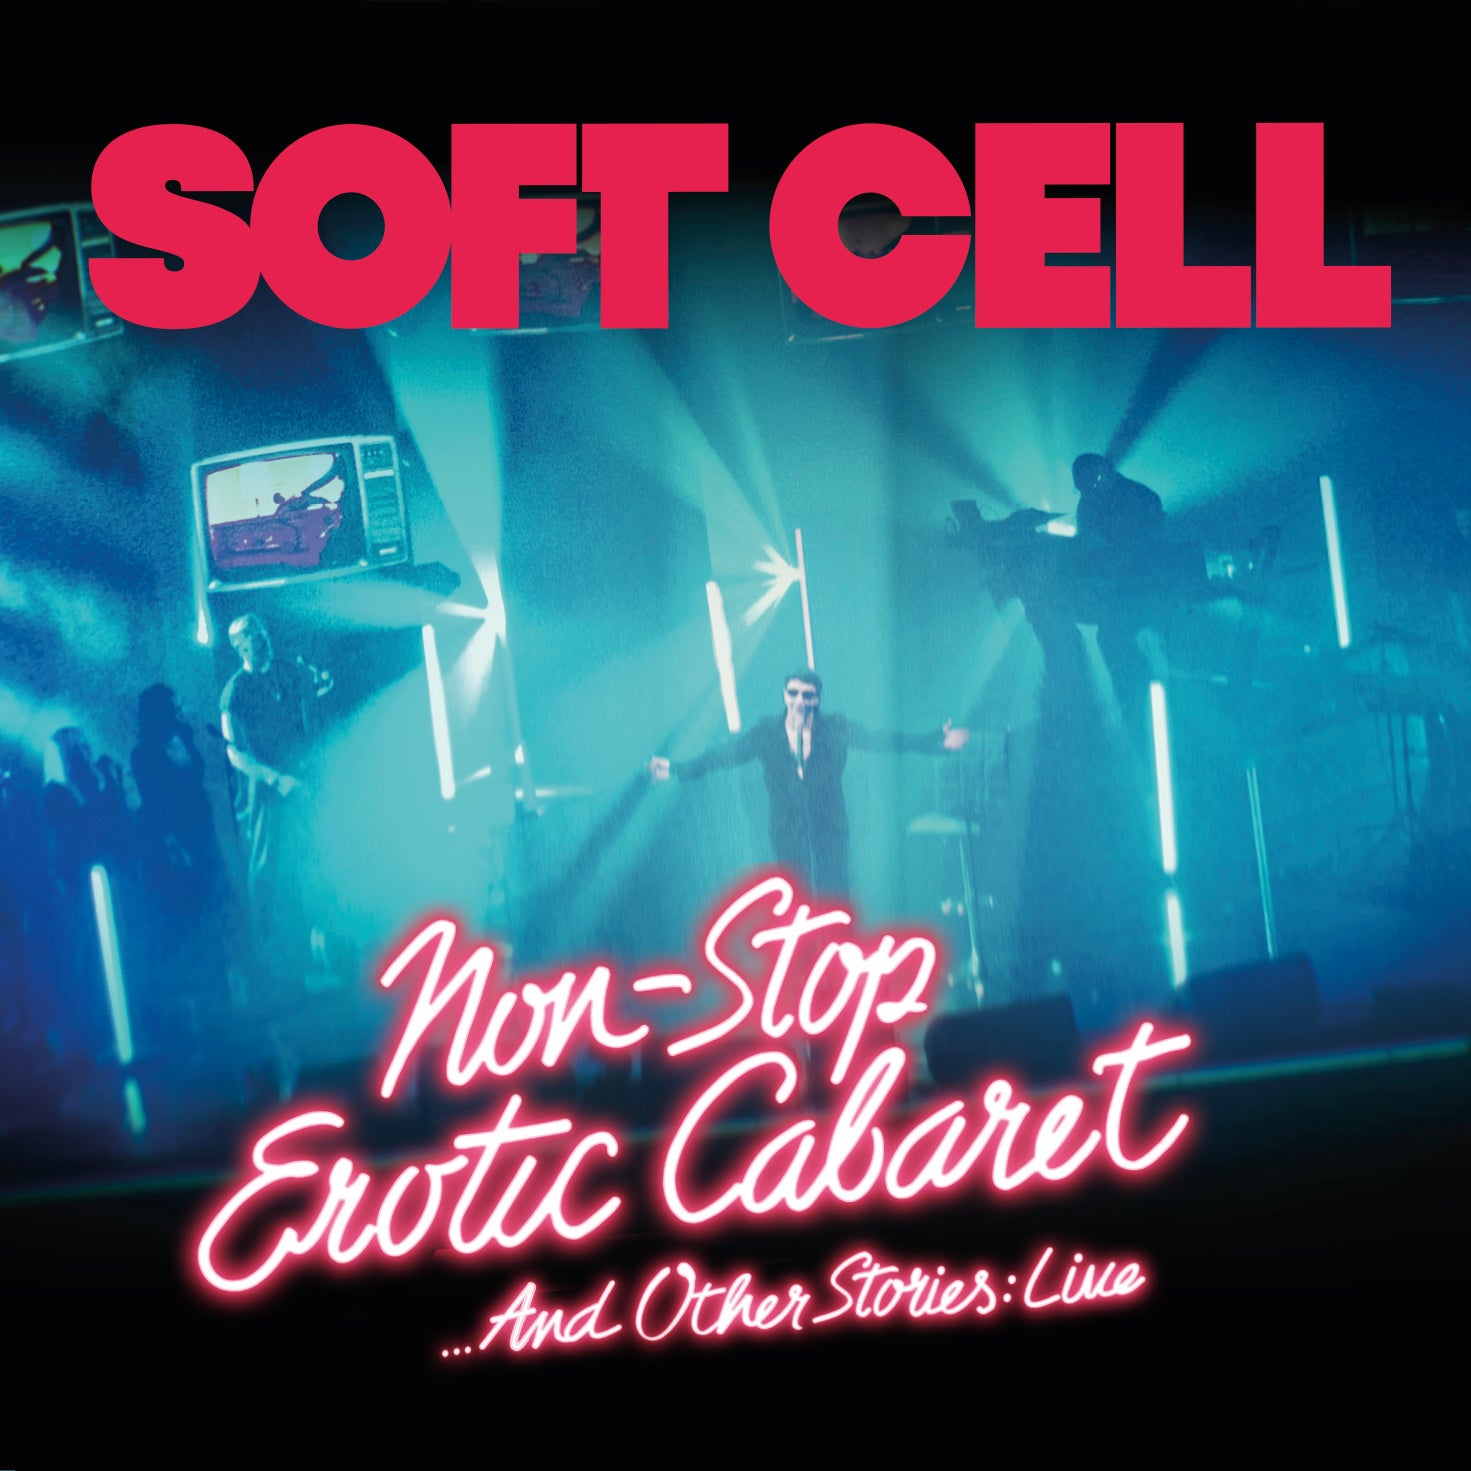 Soft Cell - Non Stop Erotic Cabaret - Live in London - Blu-Ray.